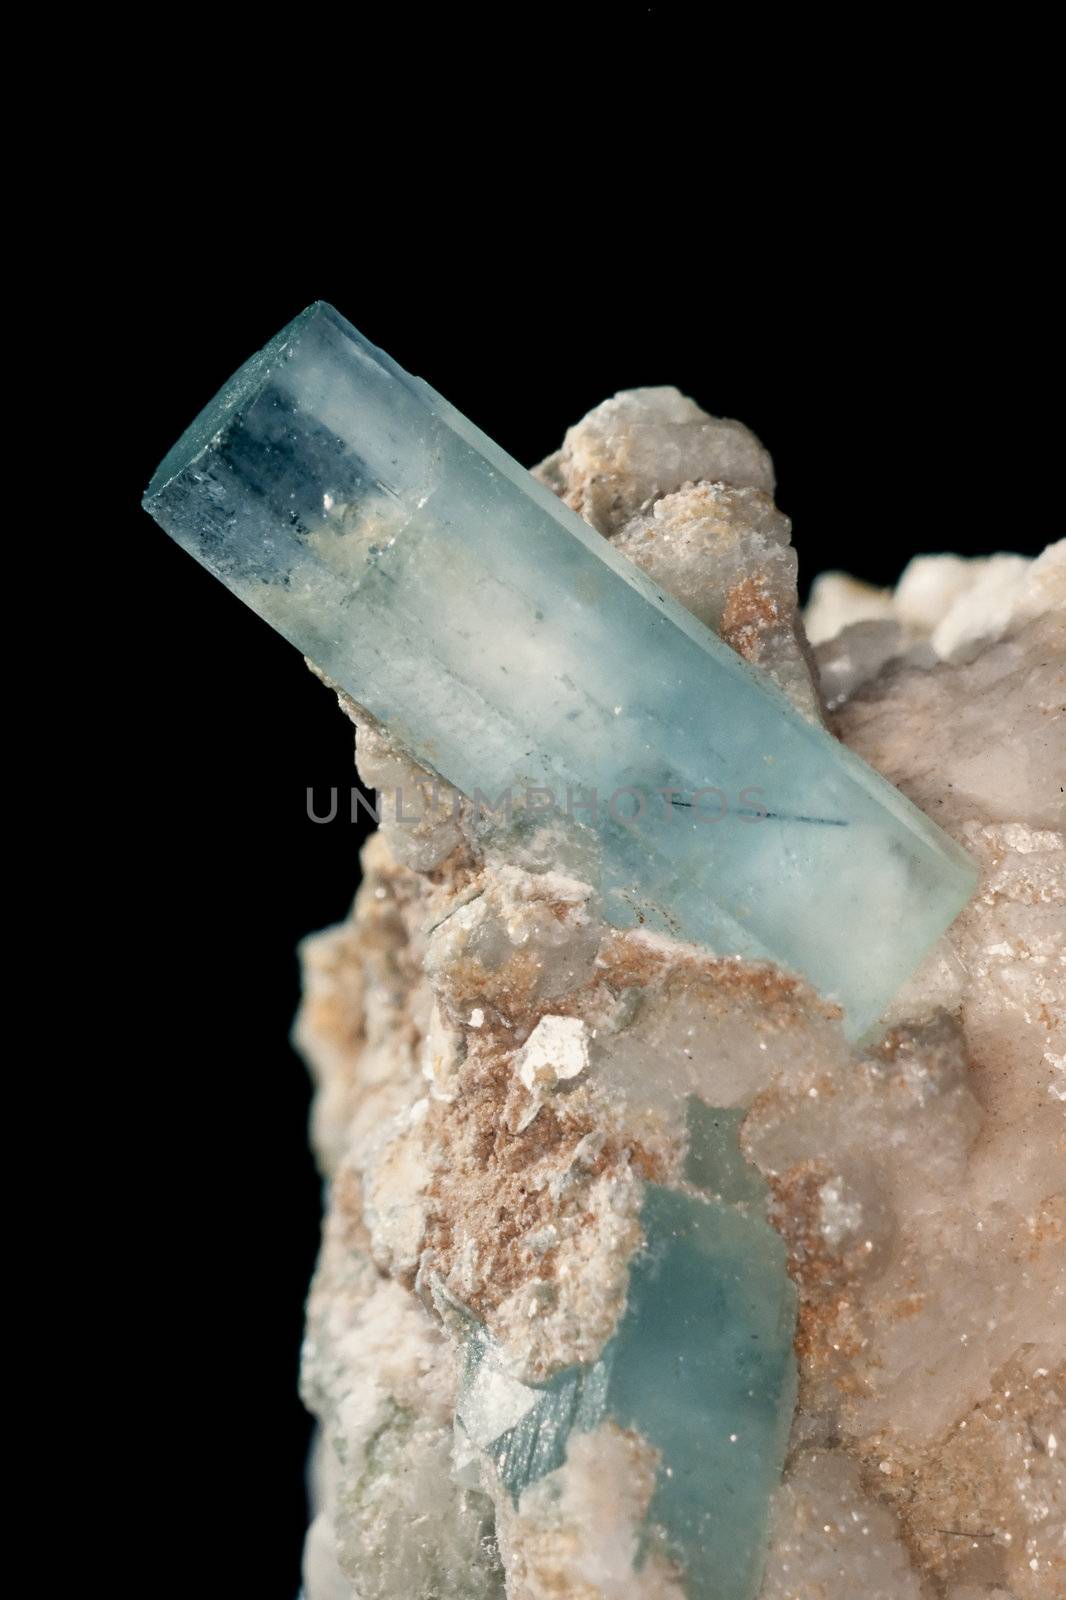 Big well formed Aquamarine crystals on matrix rock. Birthstone for March. Healers use aquamarine for problems related to thymus gland and fluid retention. Found in Pakistan.